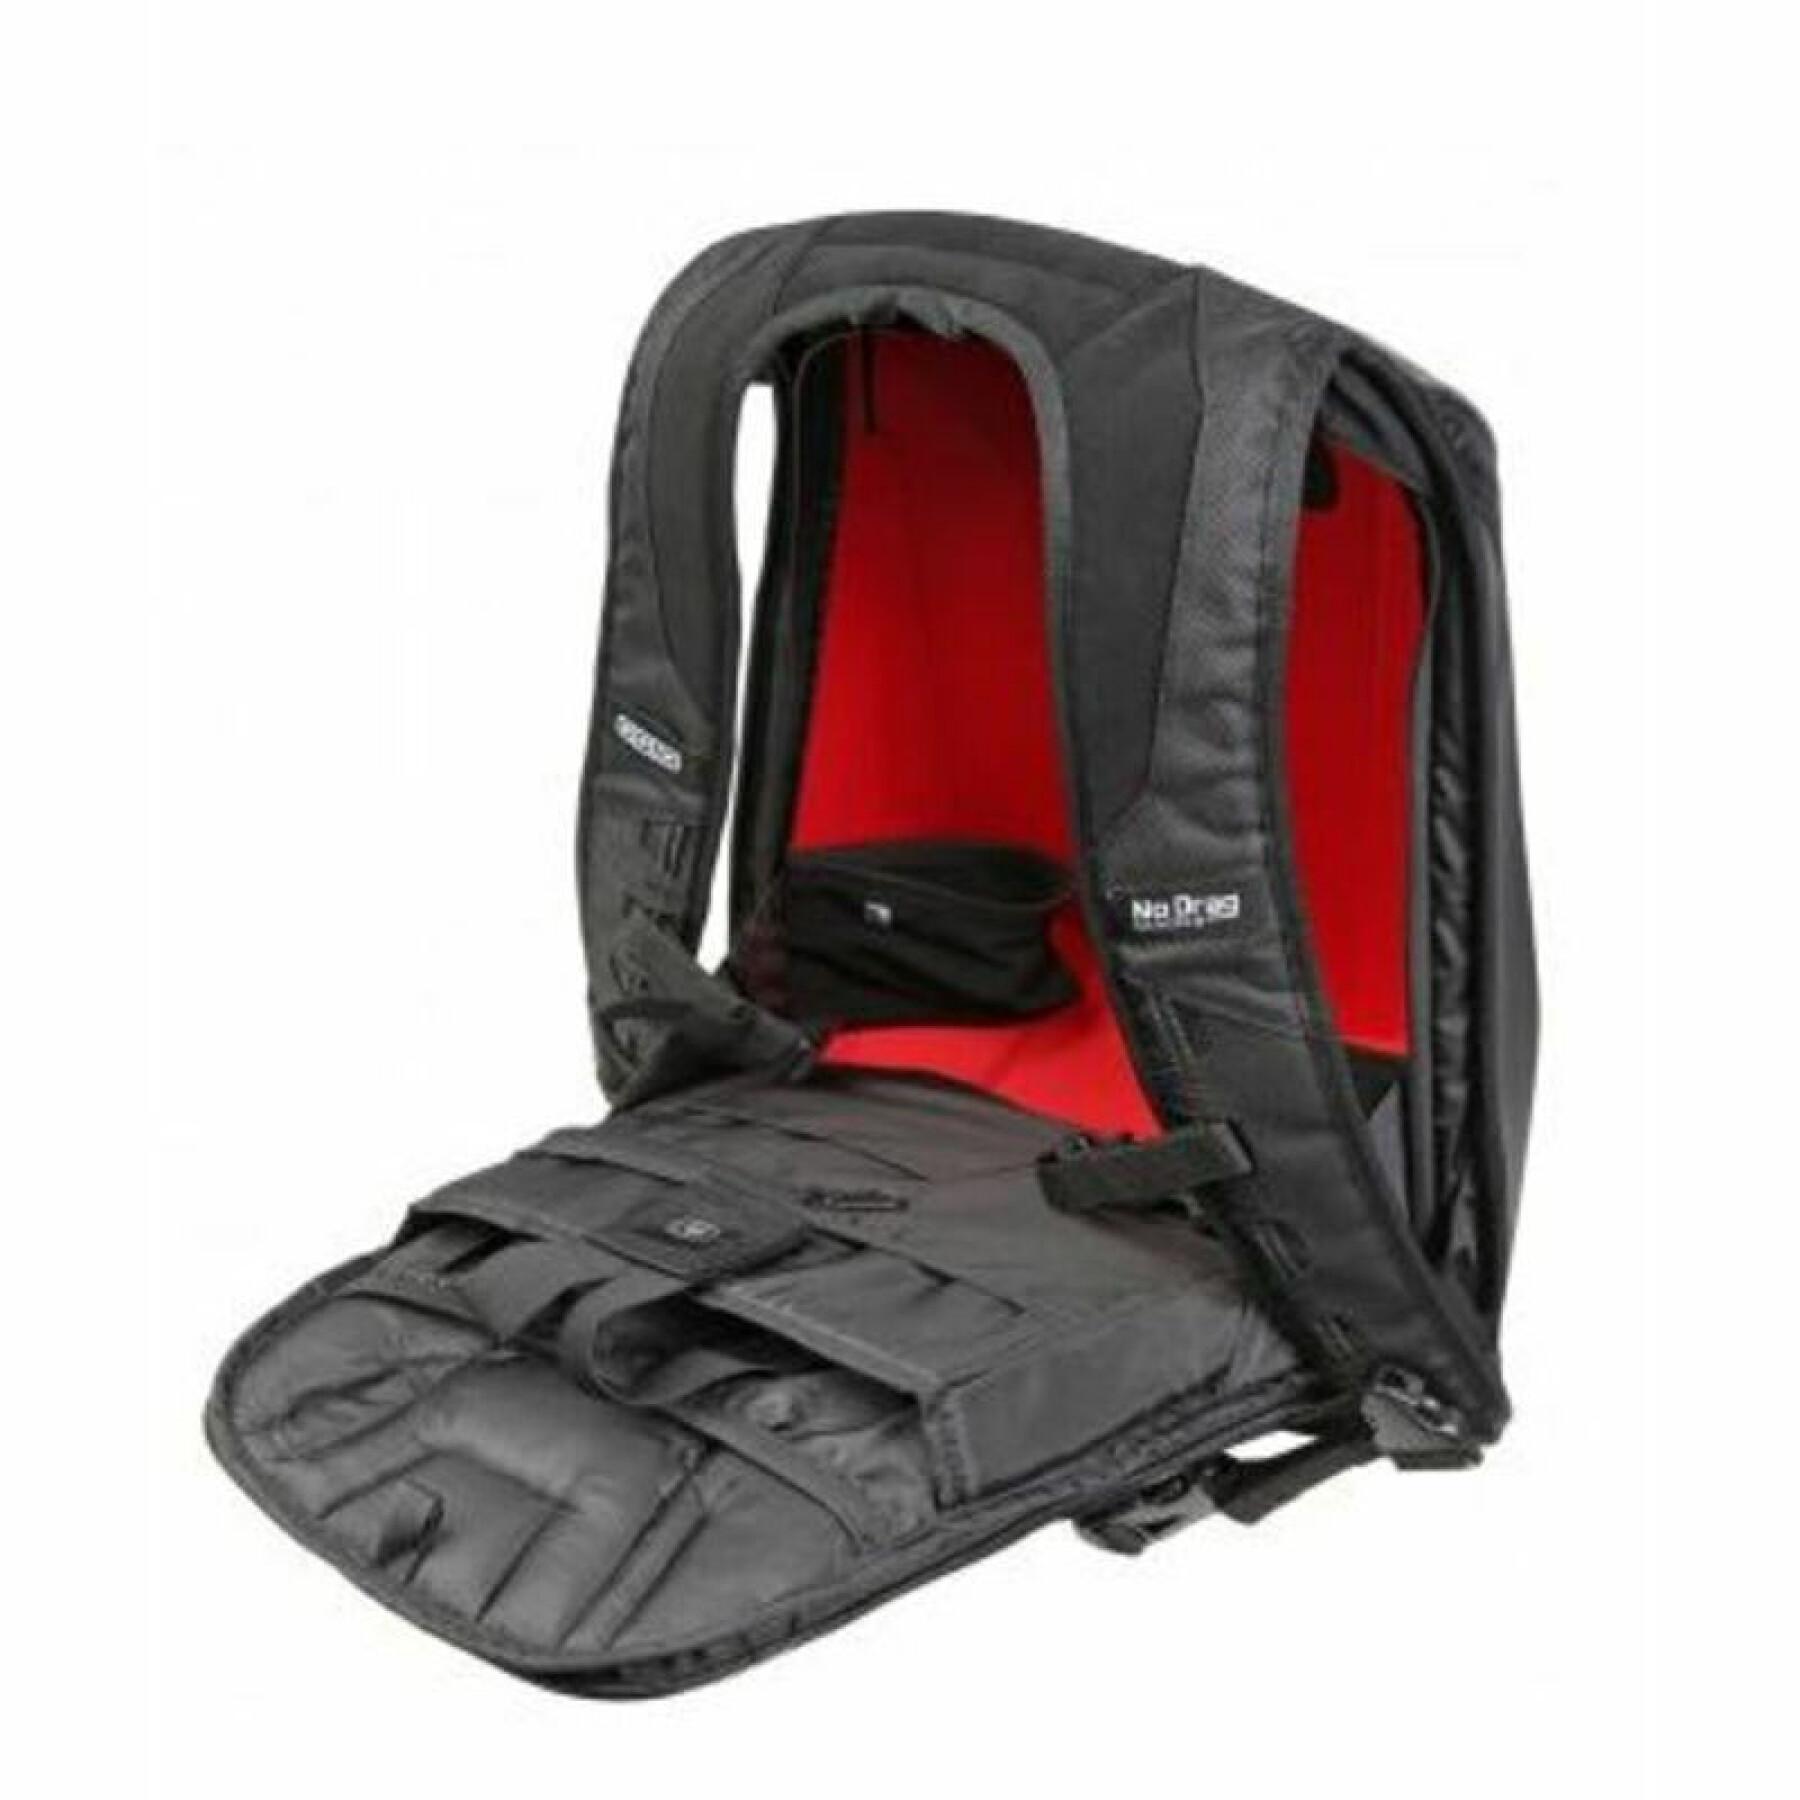 Motorcycle backpack Ogio Mach 3